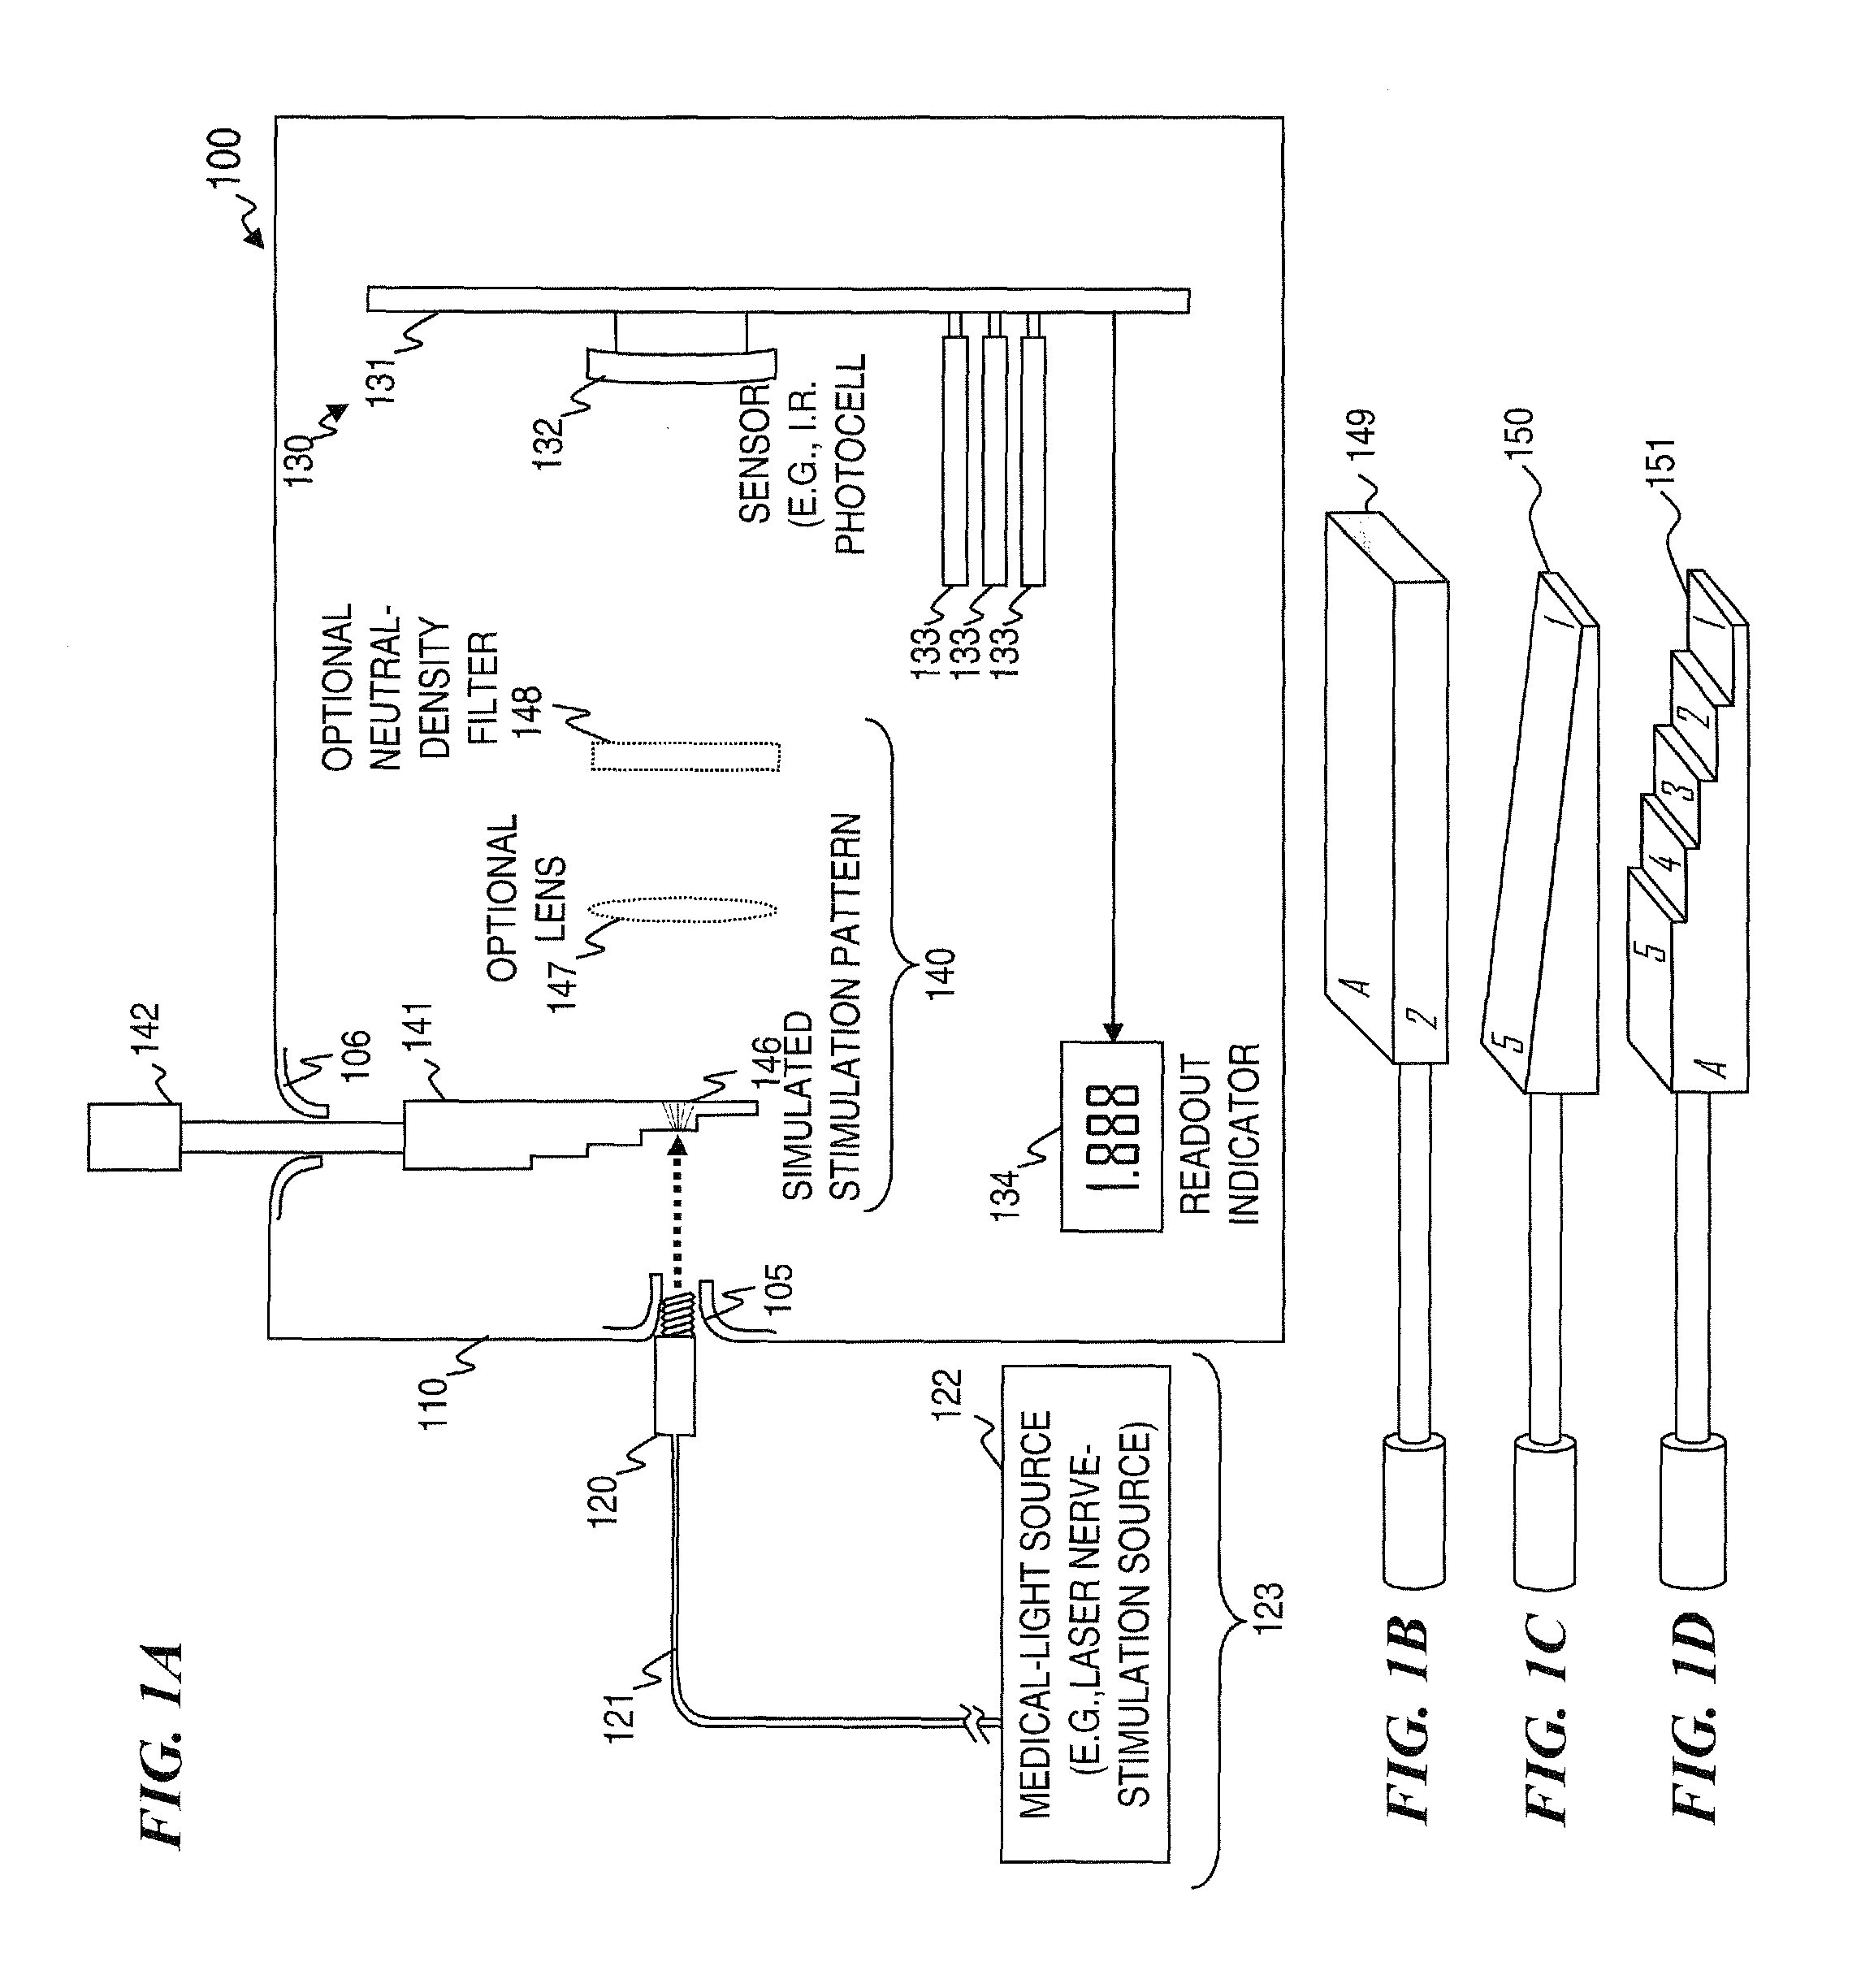 Apparatus and method for characterizing optical sources used with human and animal tissues